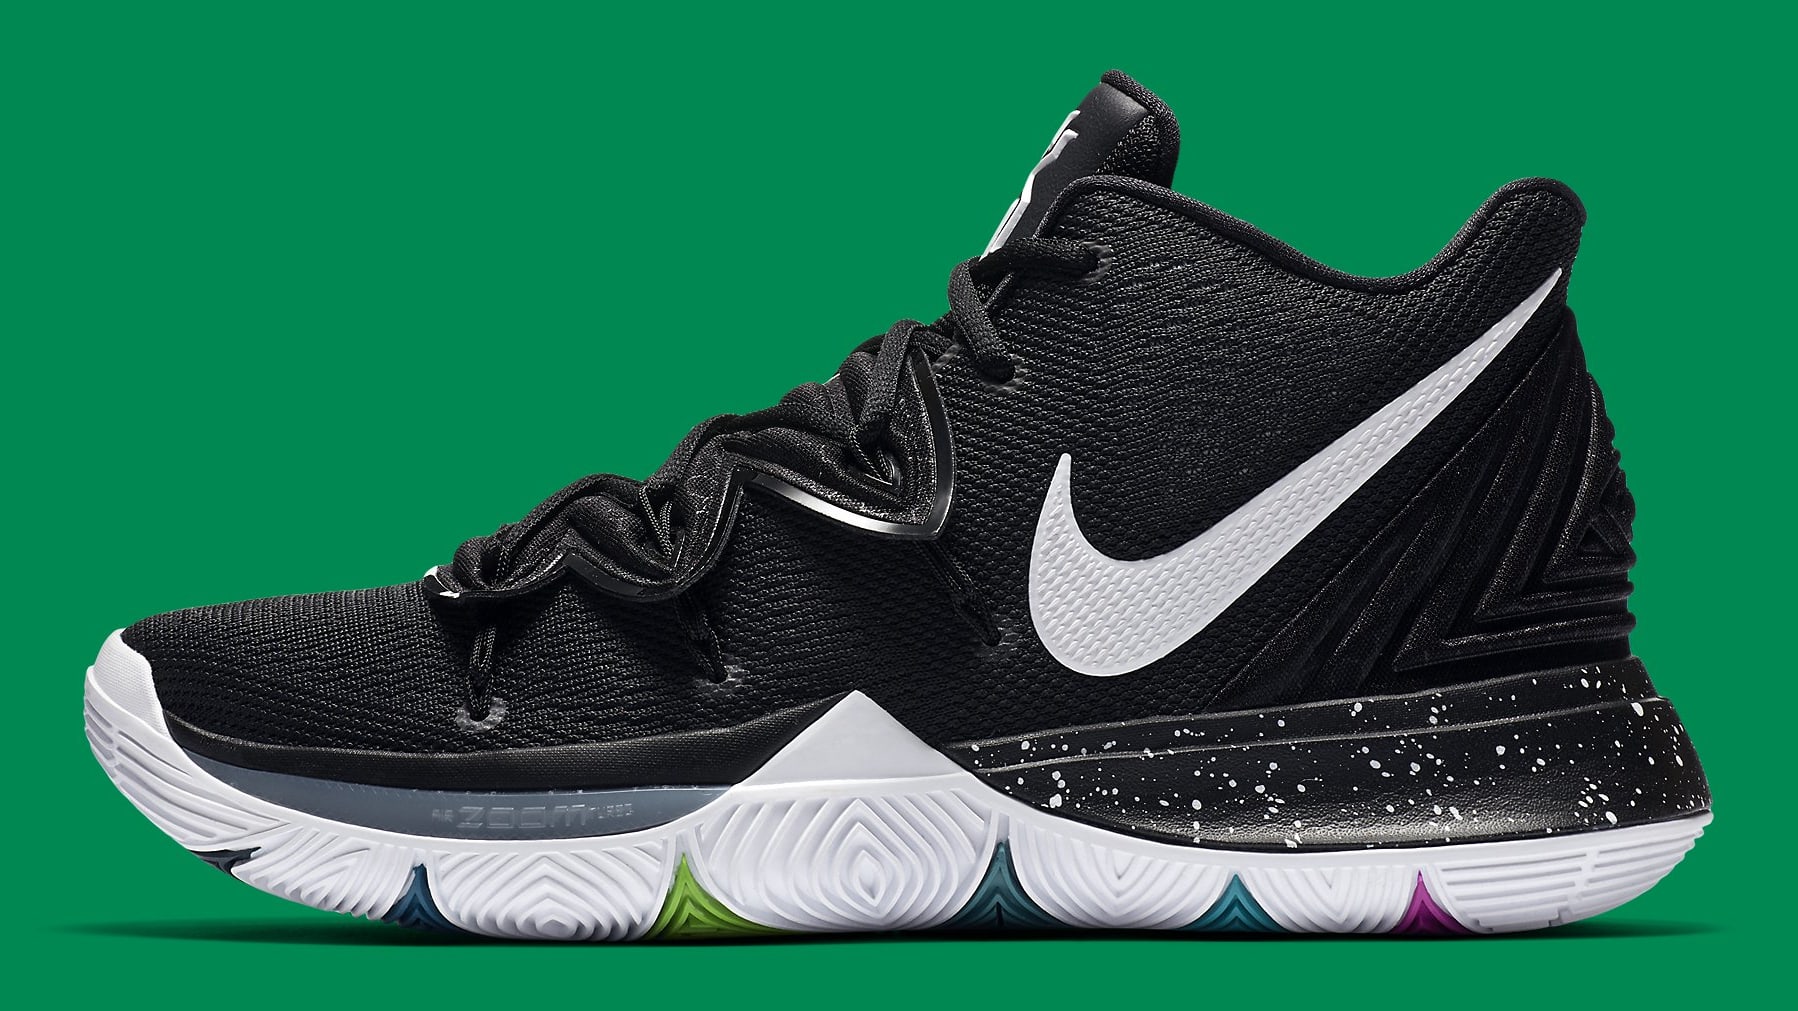 conjunctie Moeras oven The Nike Kyrie 5 Run Gets Underway with 'Black Magic' | Complex